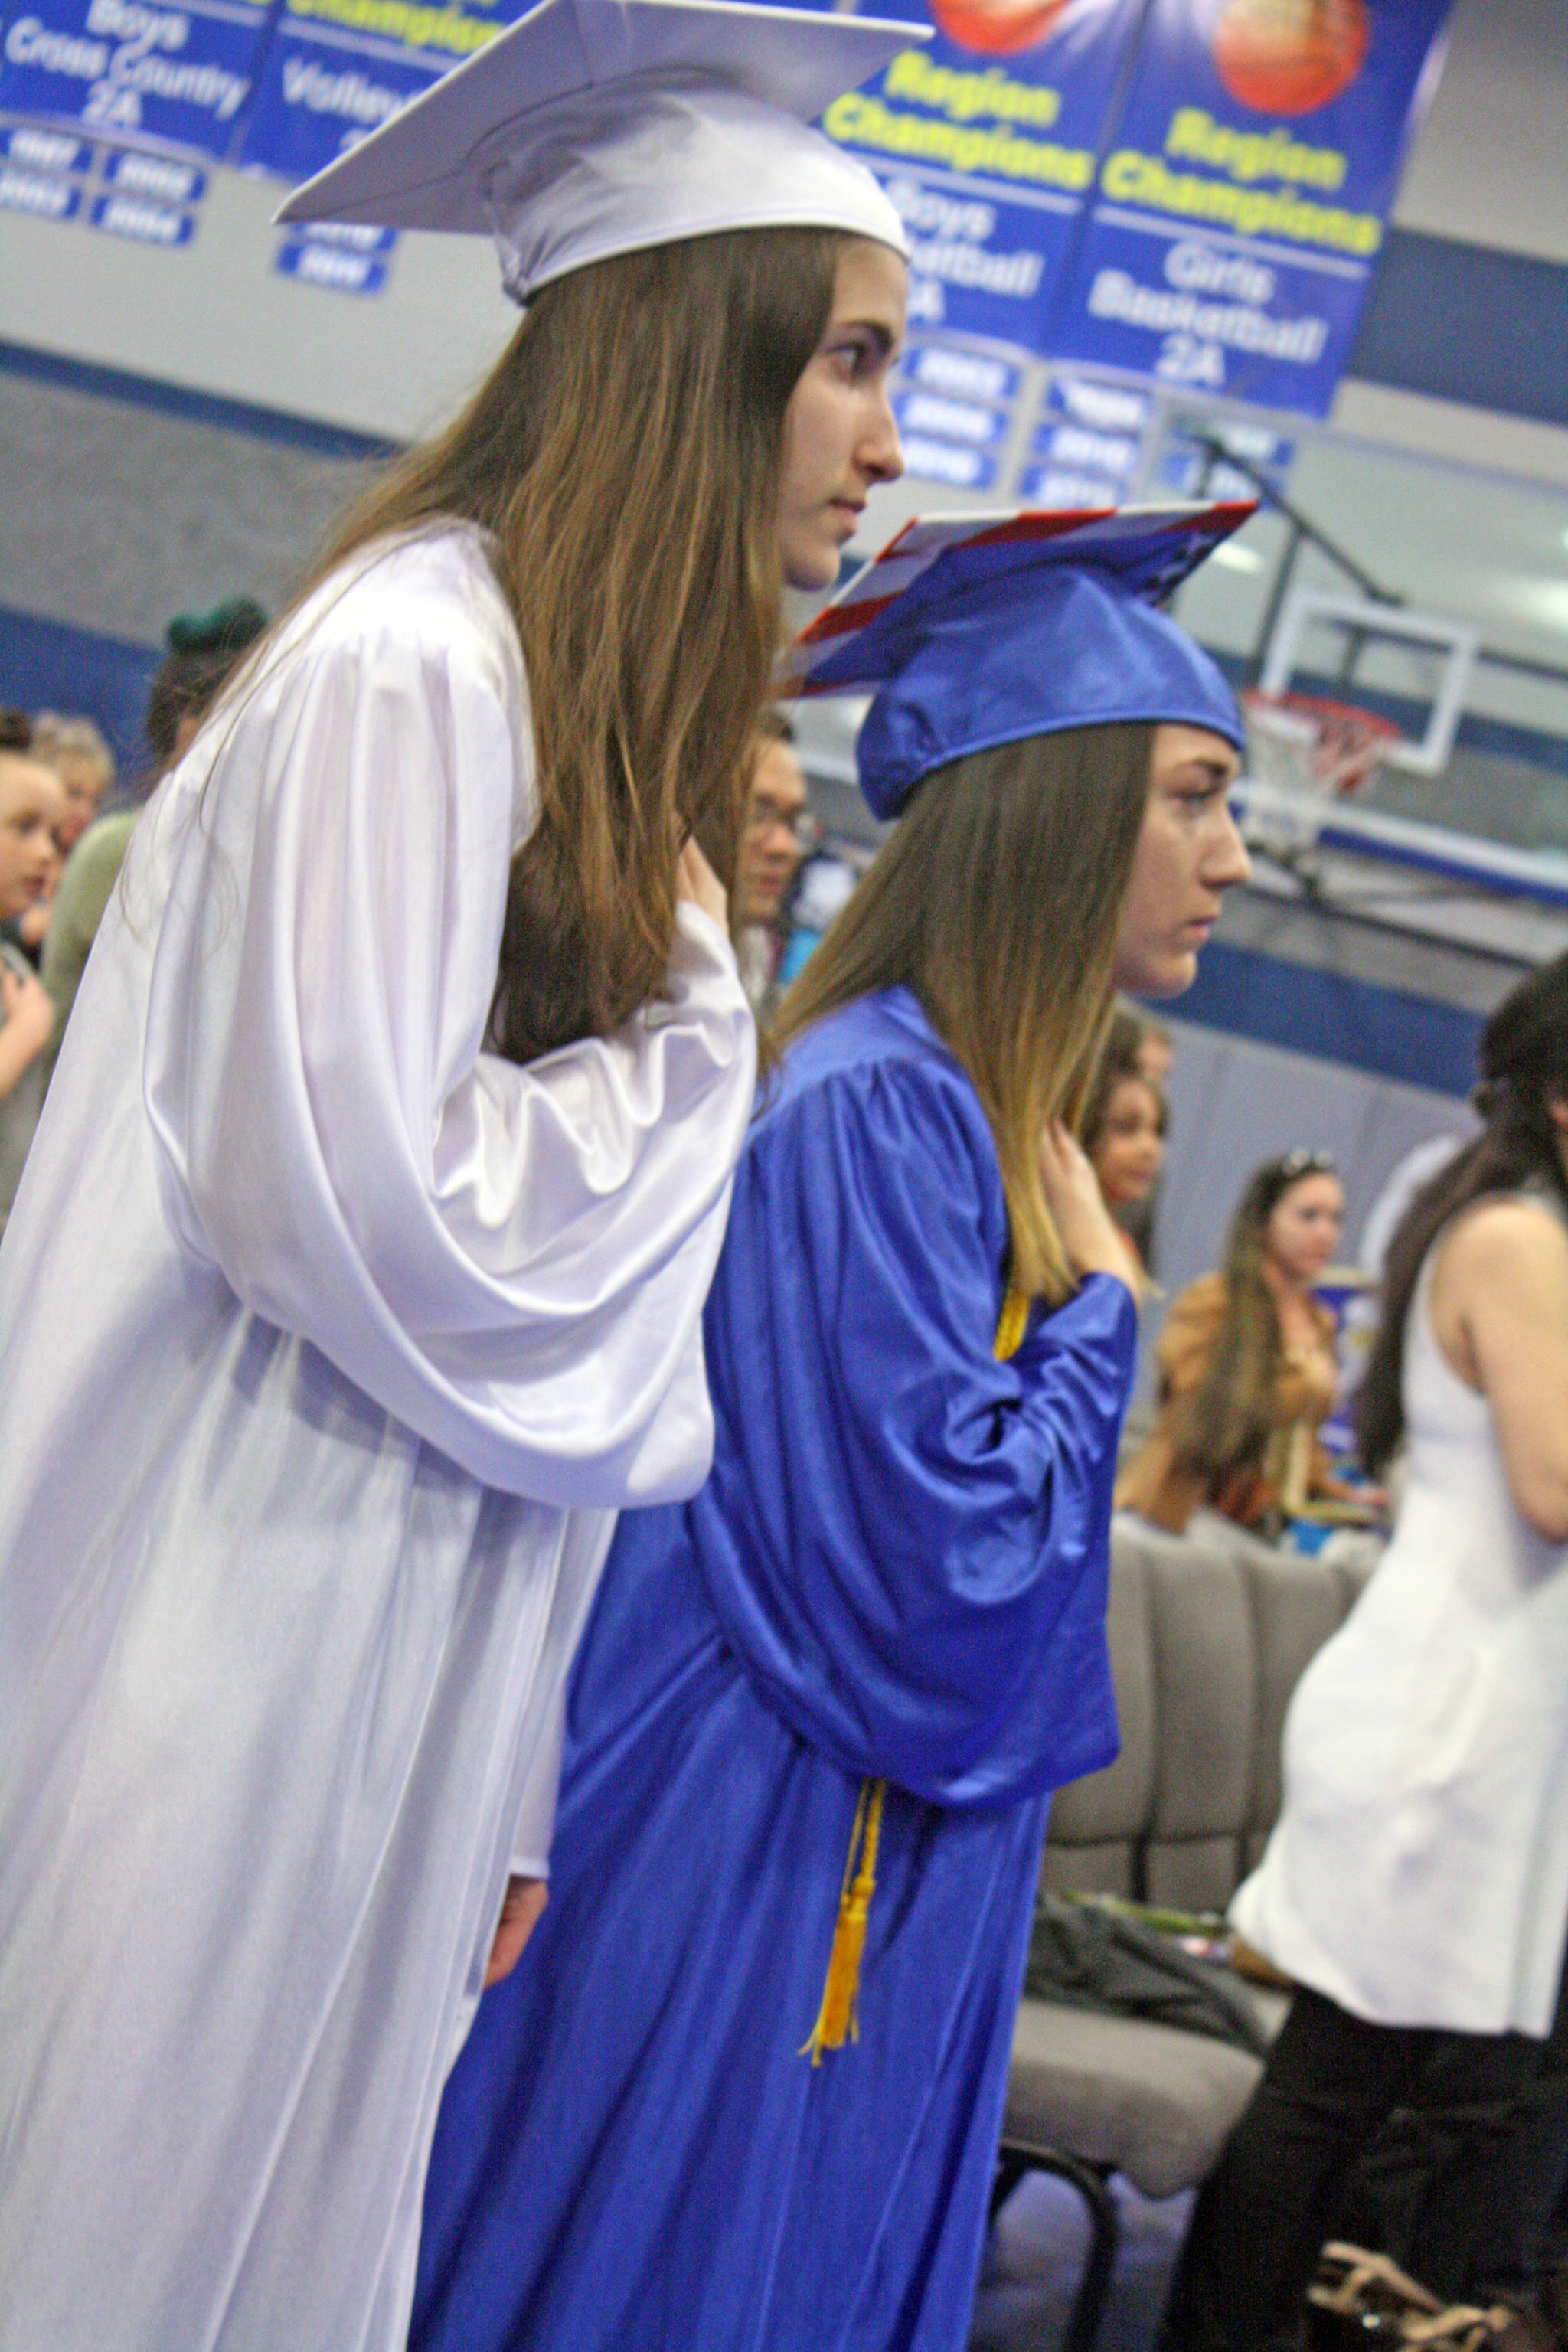 Chanelle Frances Usvat, left, and Breona Michele DeLon participate in their high school graduation ceremony at Cook Inlet Academy in Soldotna, Alaska, on Sunday, May 6.